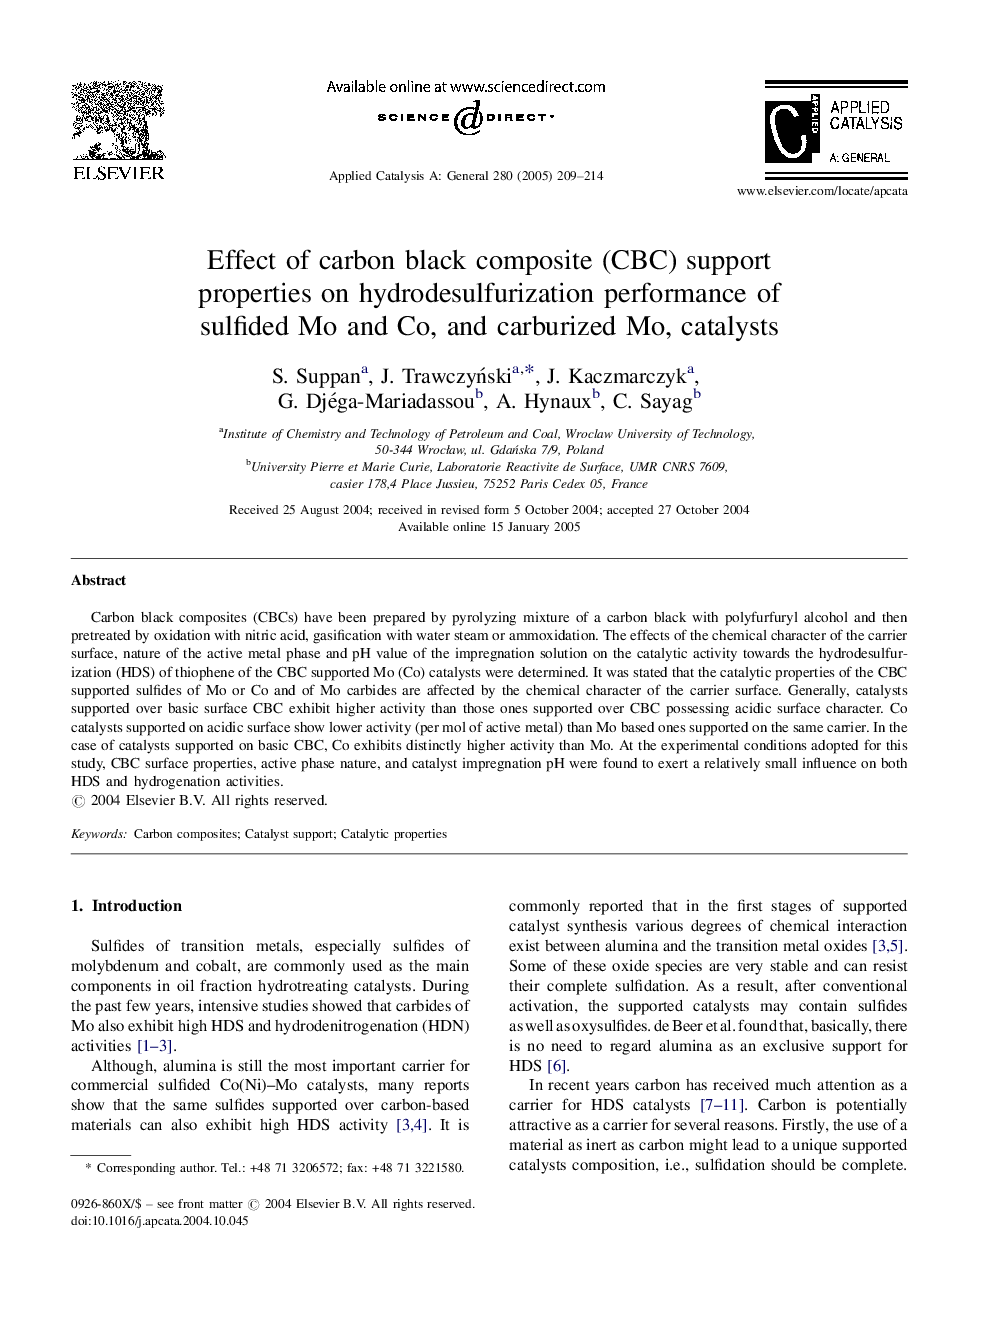 Effect of carbon black composite (CBC) support properties on hydrodesulfurization performance of sulfided Mo and Co, and carburized Mo, catalysts